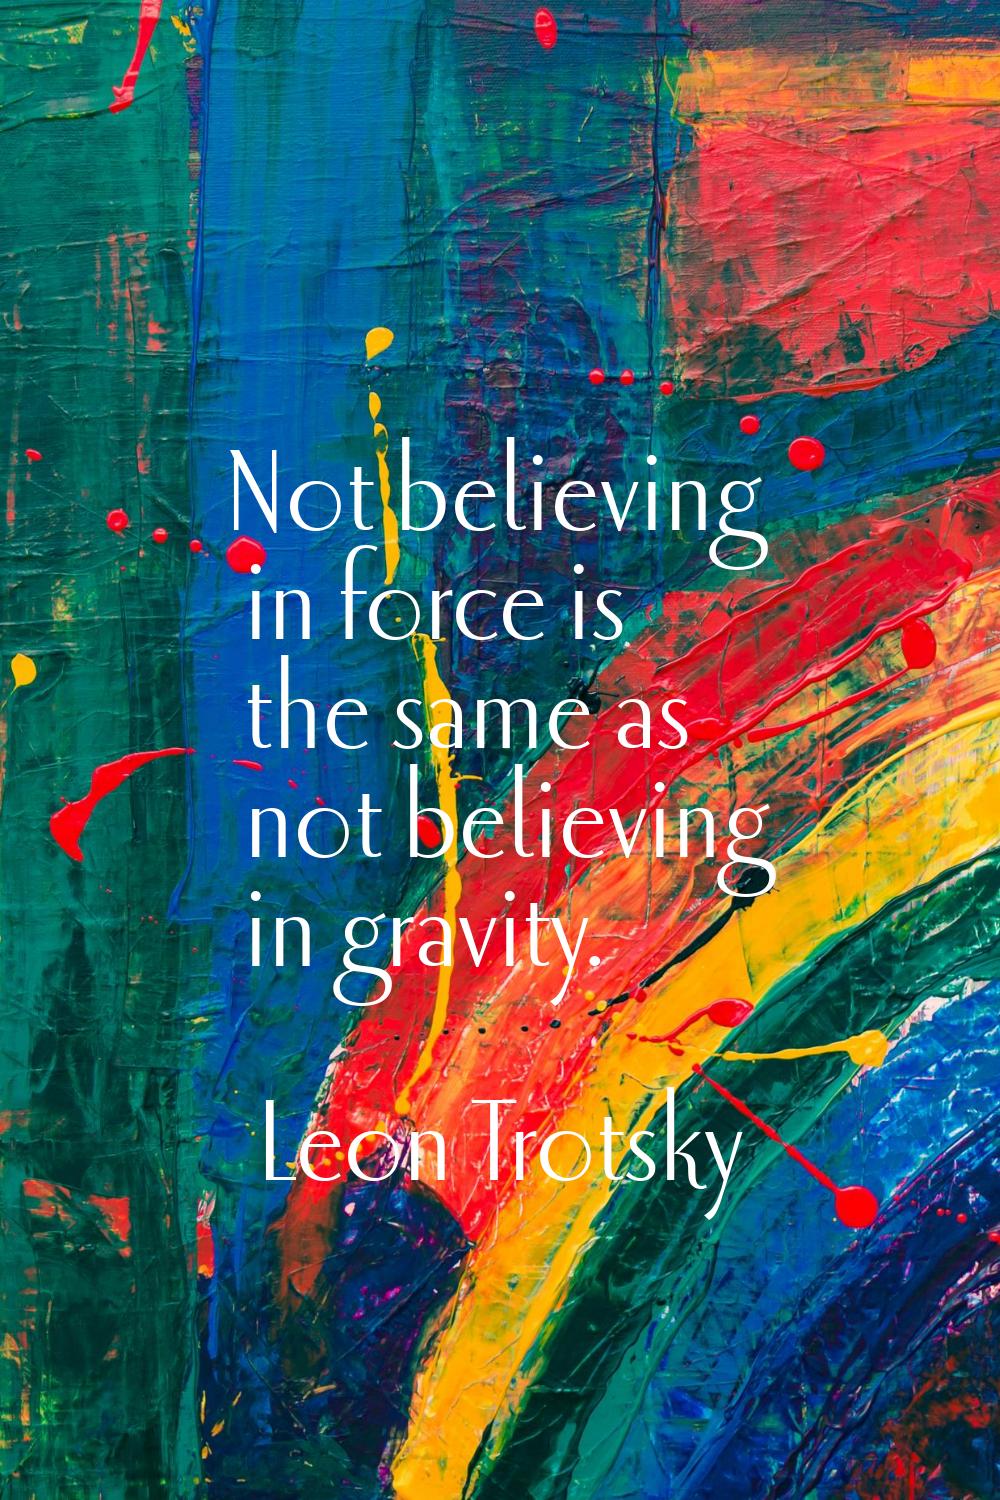 Not believing in force is the same as not believing in gravity.